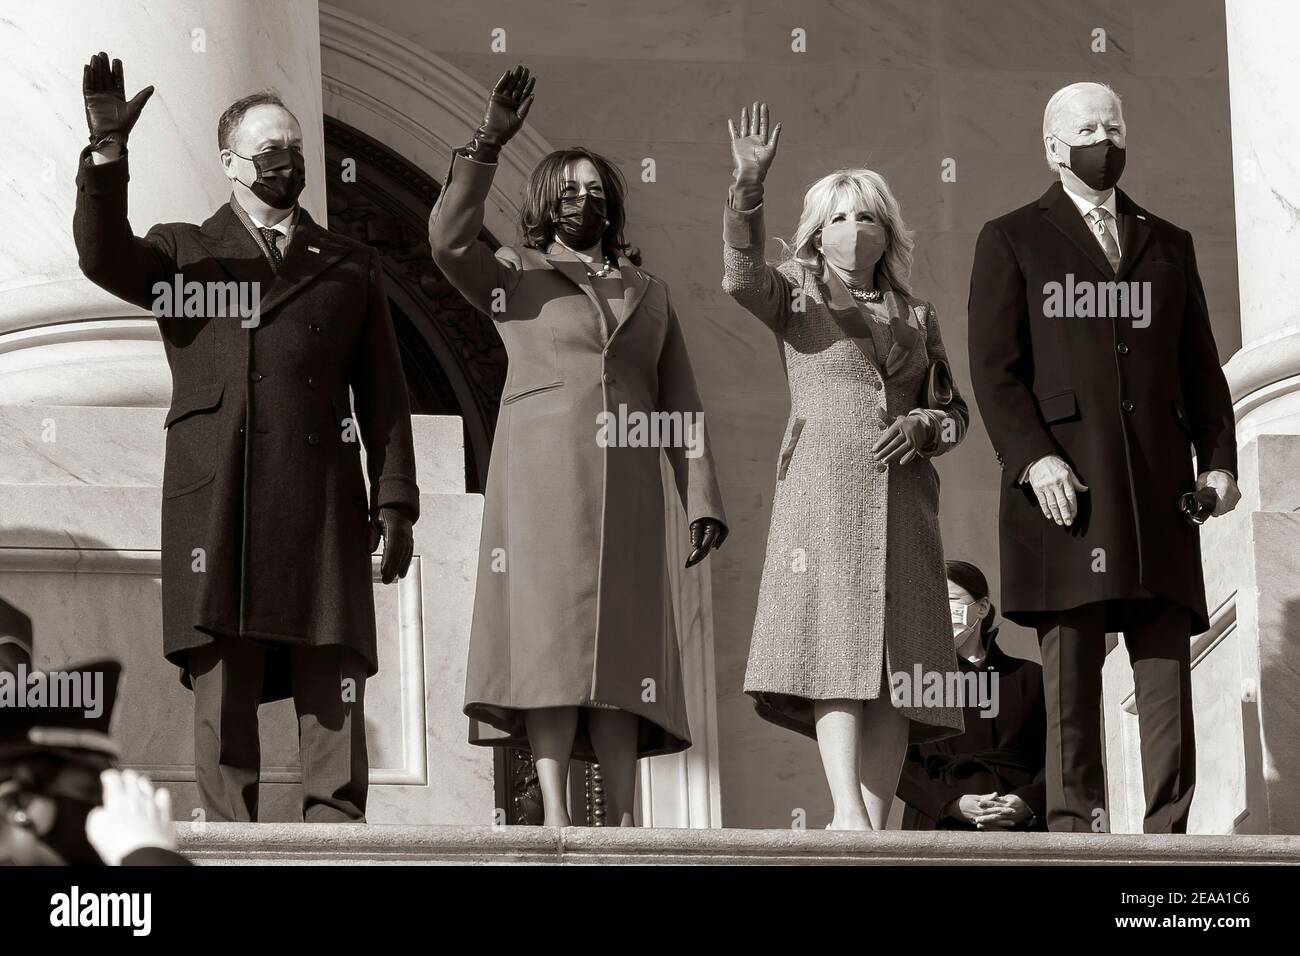 President-elect Joe Biden, Dr. Jill Biden, Vice President-elect Kamala Harris and Mr. Doug Emhoff arrive at the U.S. Capitol in Washington, D.C. Wednesday, Jan. 20, 2021, prior to the 59th Presidential inauguration. (Official White House Photo by Lawrence Jackson) Stock Photo